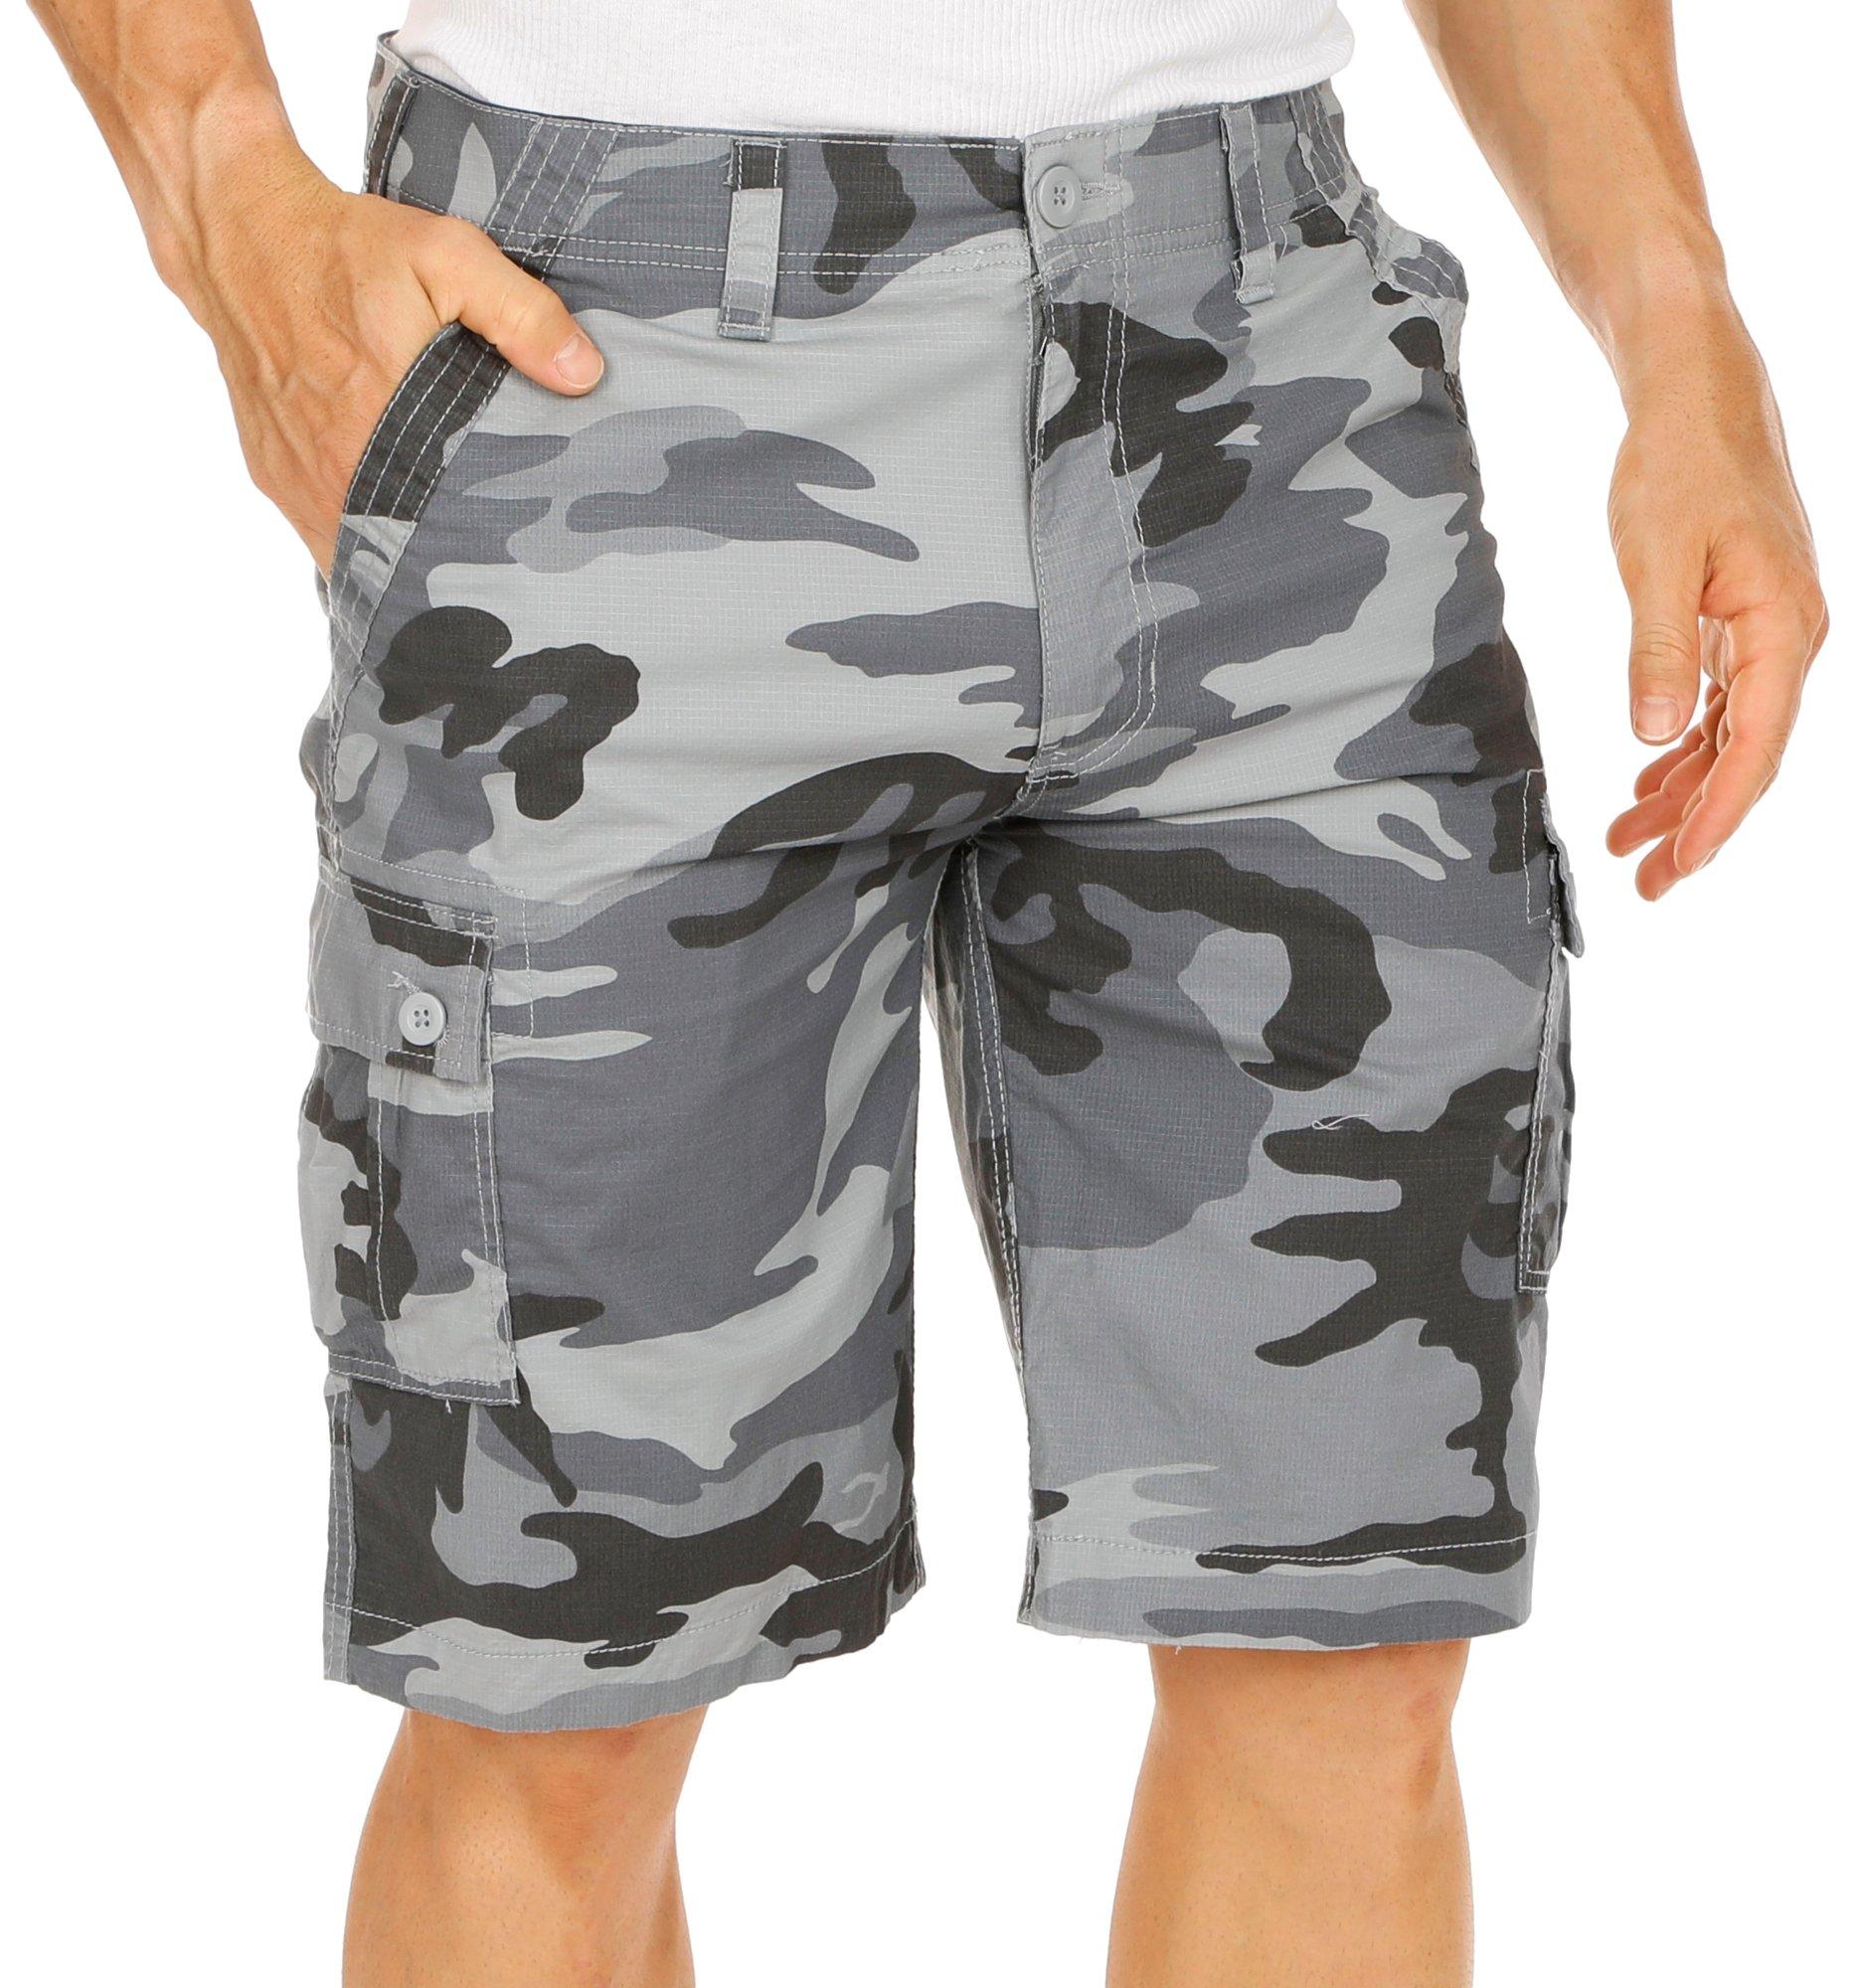 Wear First Mens Solid Cargo Shorts